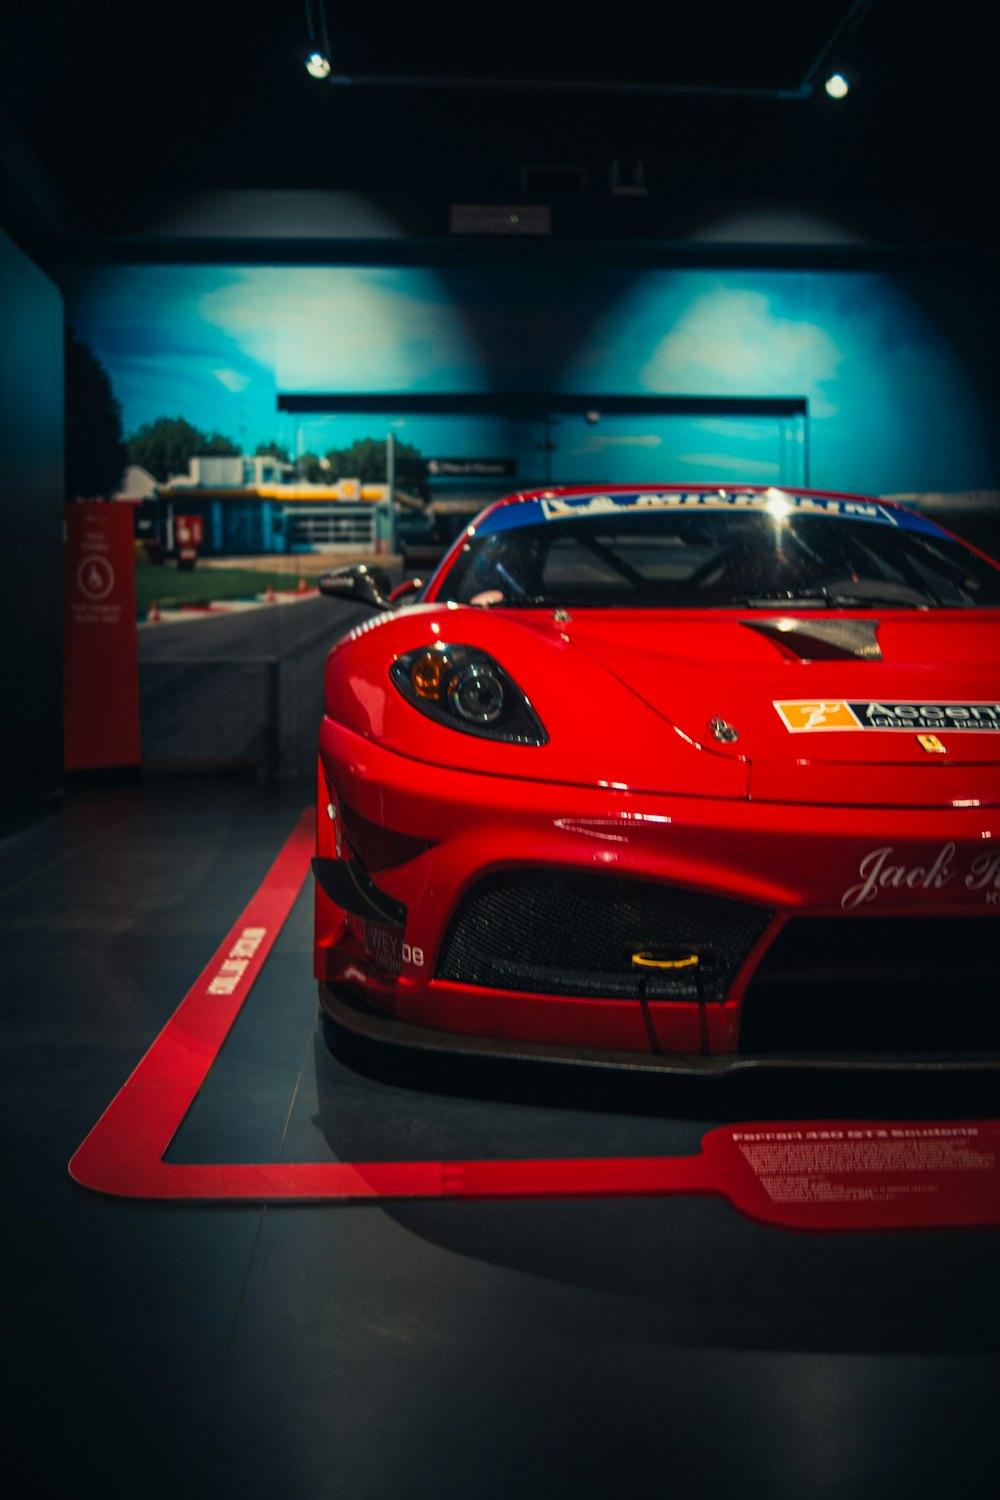 a red sports car on display in a dark room